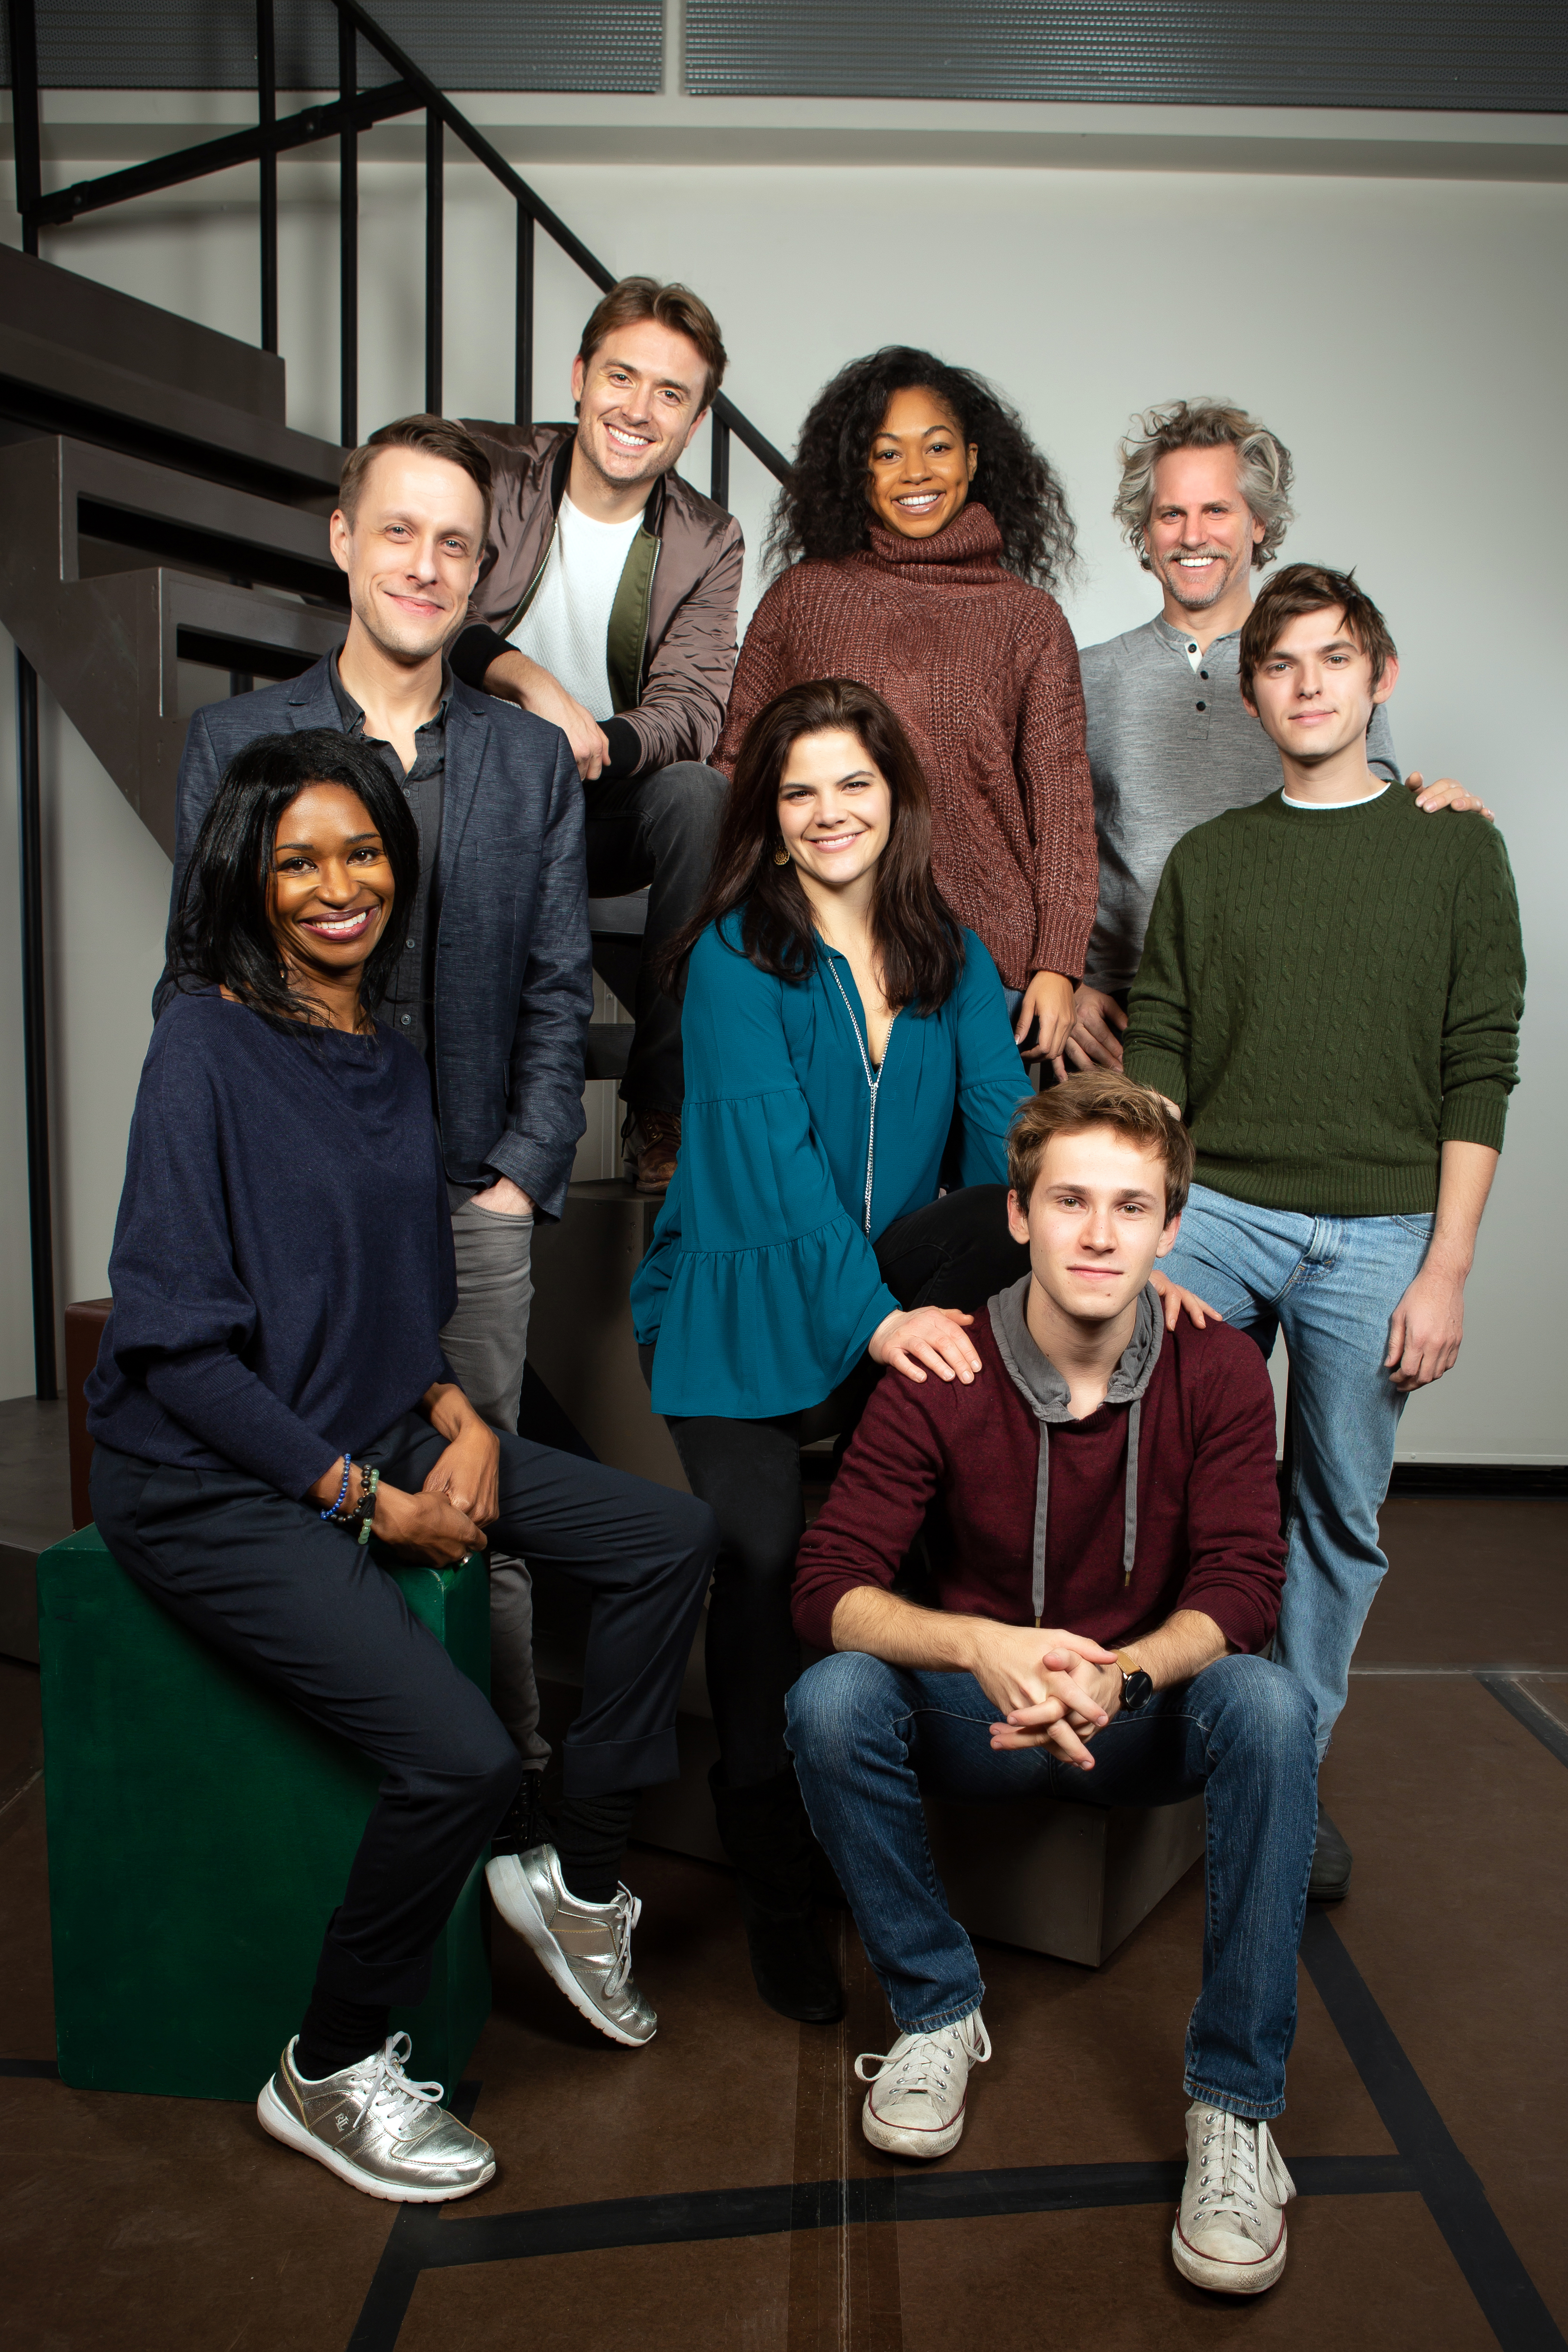 The new leads of “Cursed Child” on Broadway